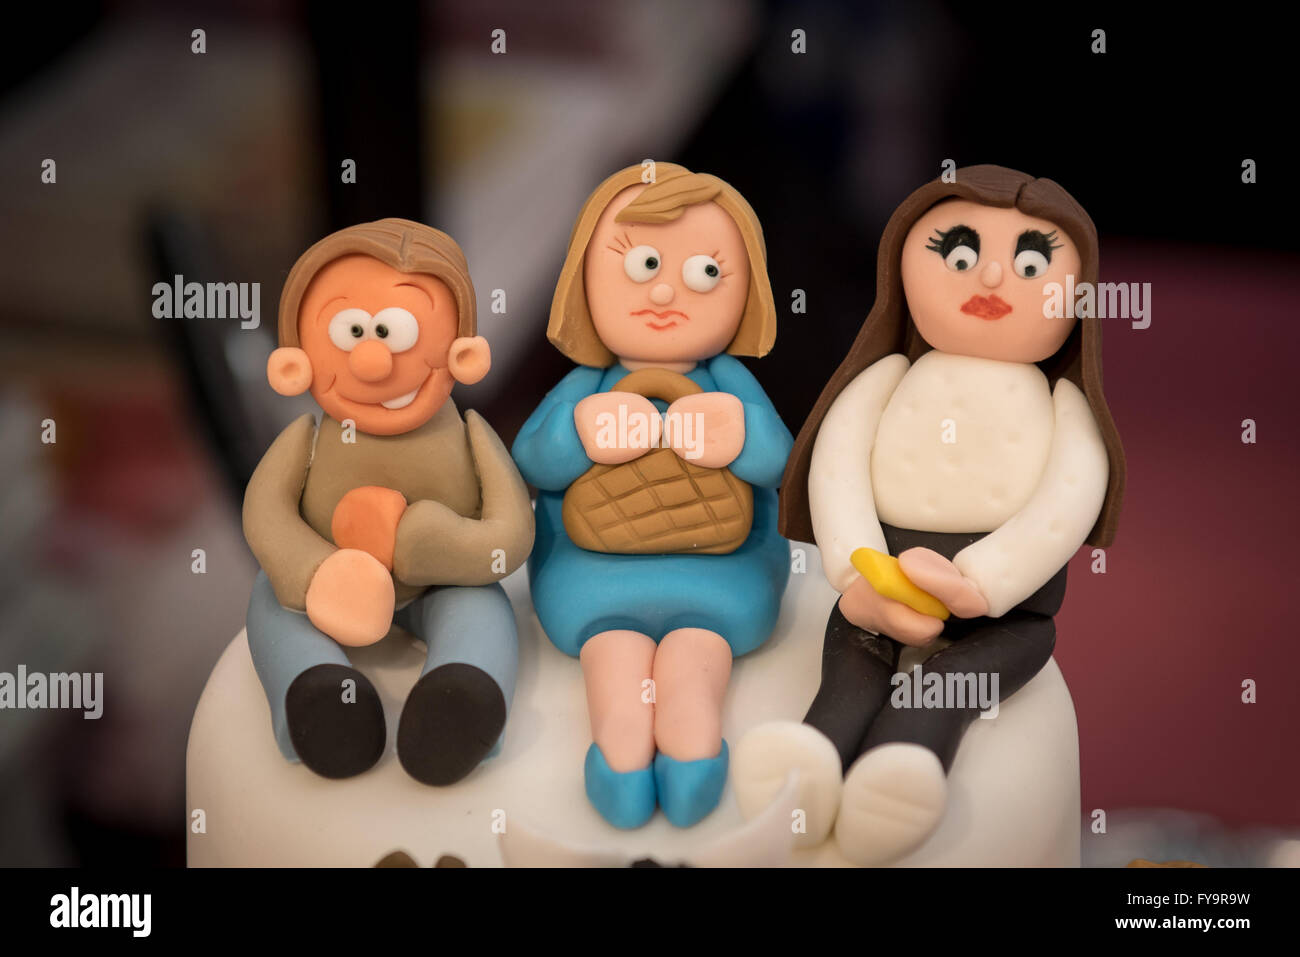 Family mum dad daughter cake decorations at Cake International – The Sugarcraft, Cake Decorating and Baking Show in London Stock Photo